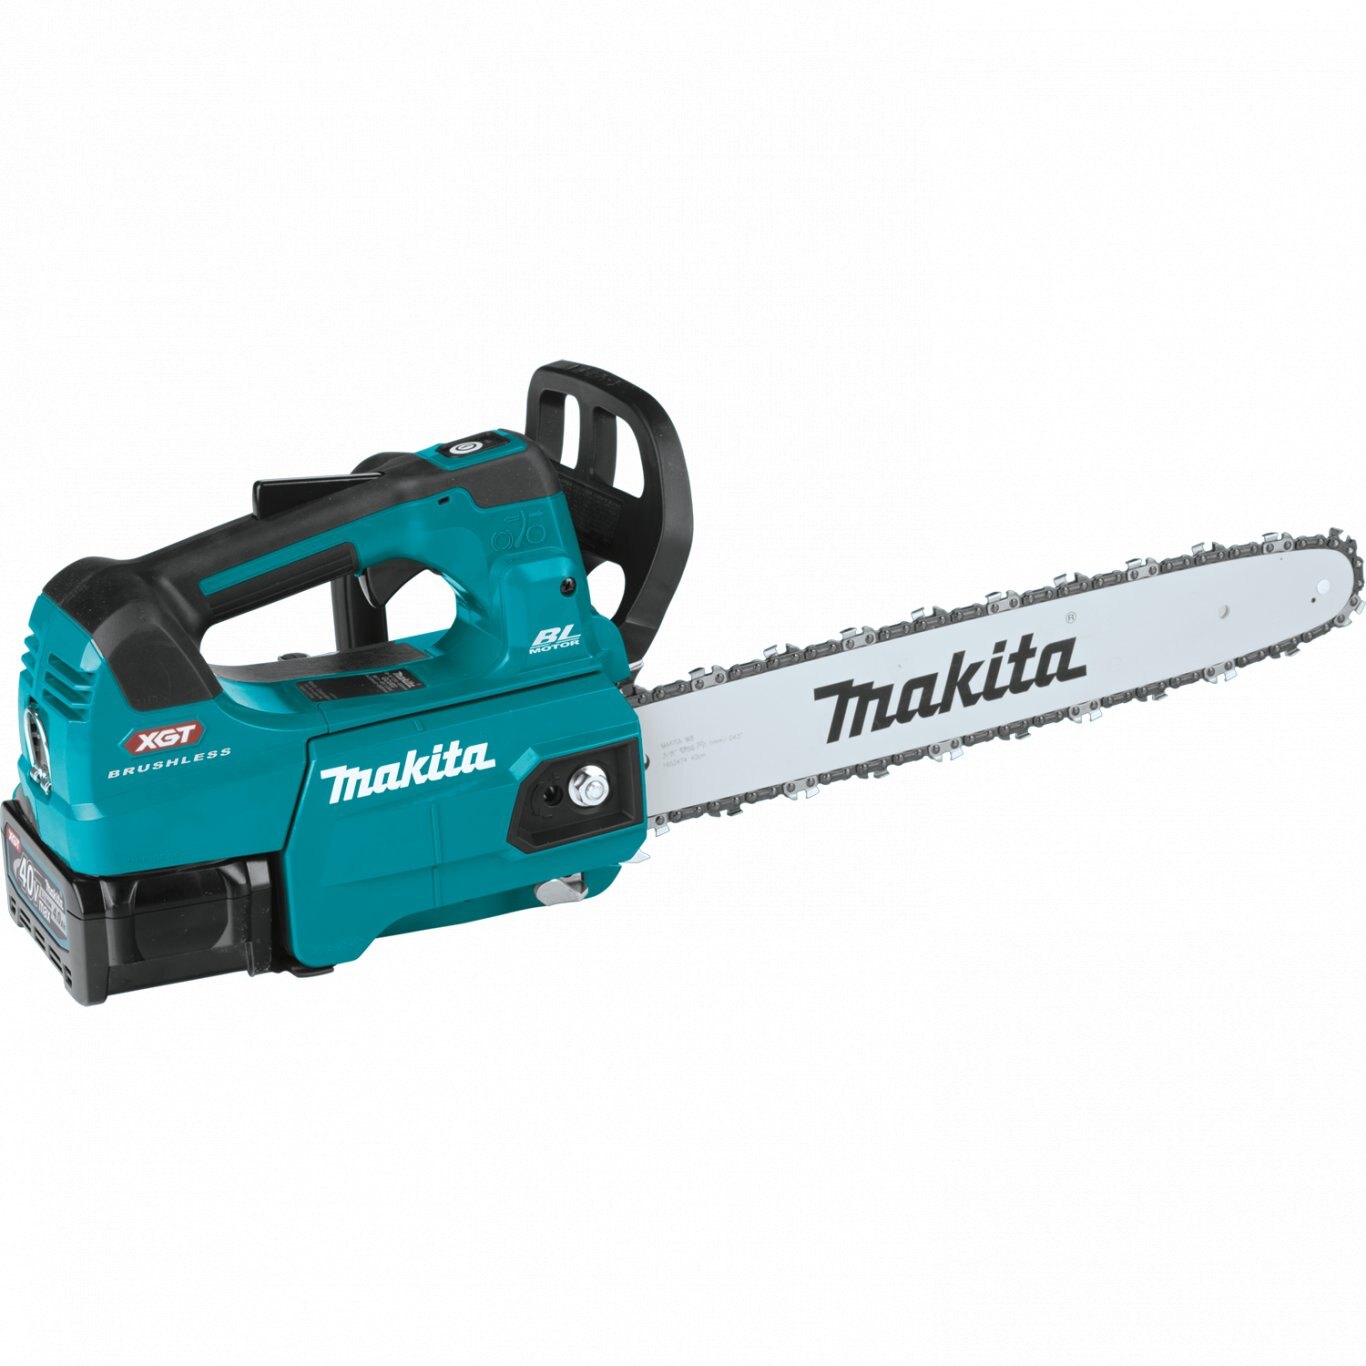 Makita 40V max XGT® Brushless Cordless 16 Top Handle Chain Saw, Tool Only